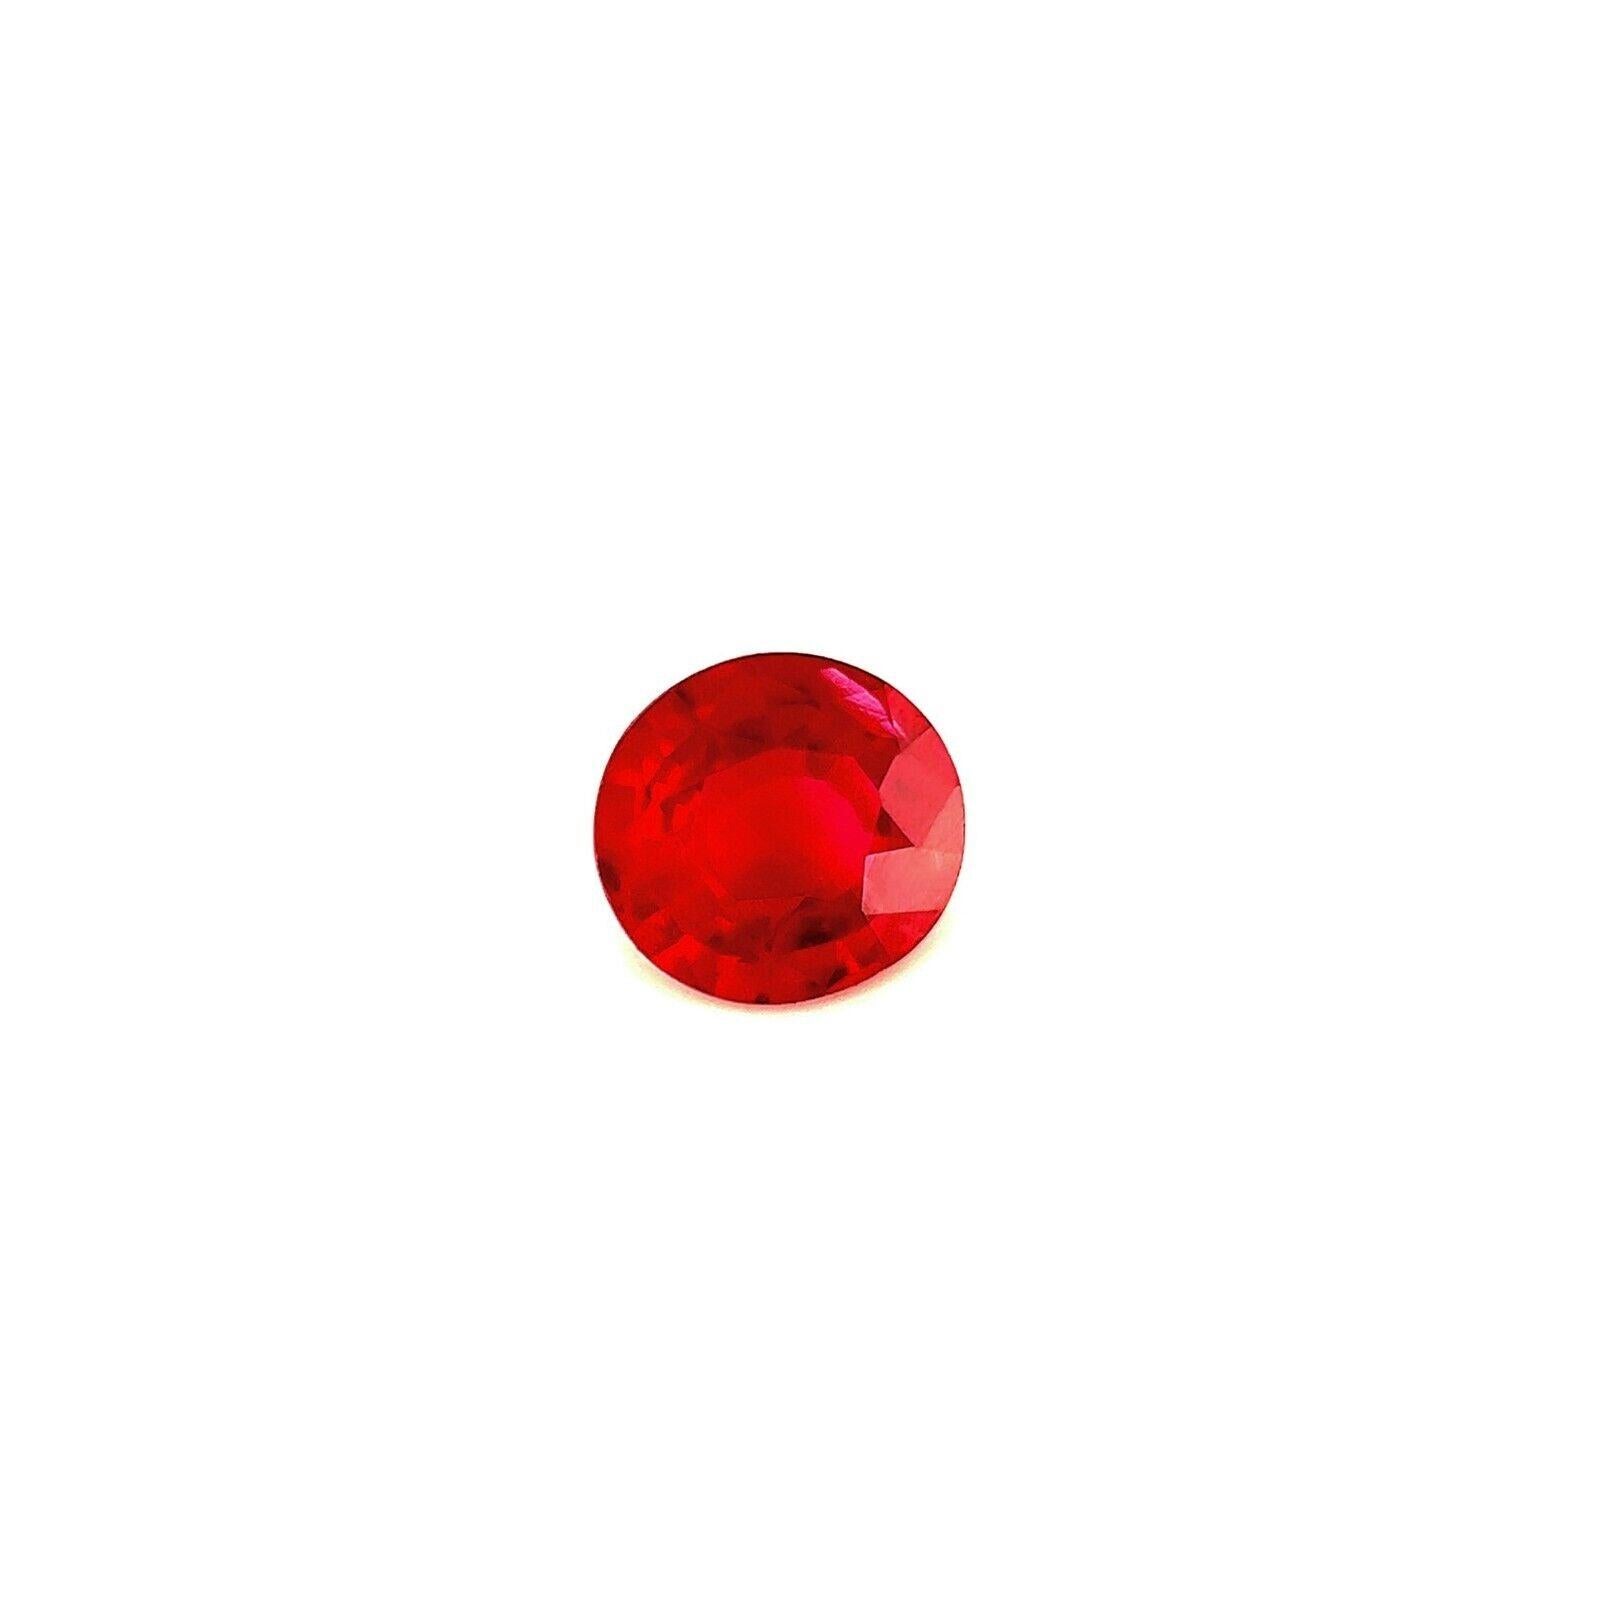 Rare Natural Pigeon Blood Red Ruby GRA Certified 0.47Ct Oval Cut Gem

Natural GRA Certified 'Pigeon Blood' Red Ruby Gemstone.
0.47 Carat ruby with a beautiful and rare 'pigeon blood' red colour.
Fully certified by GRA confirming stone as